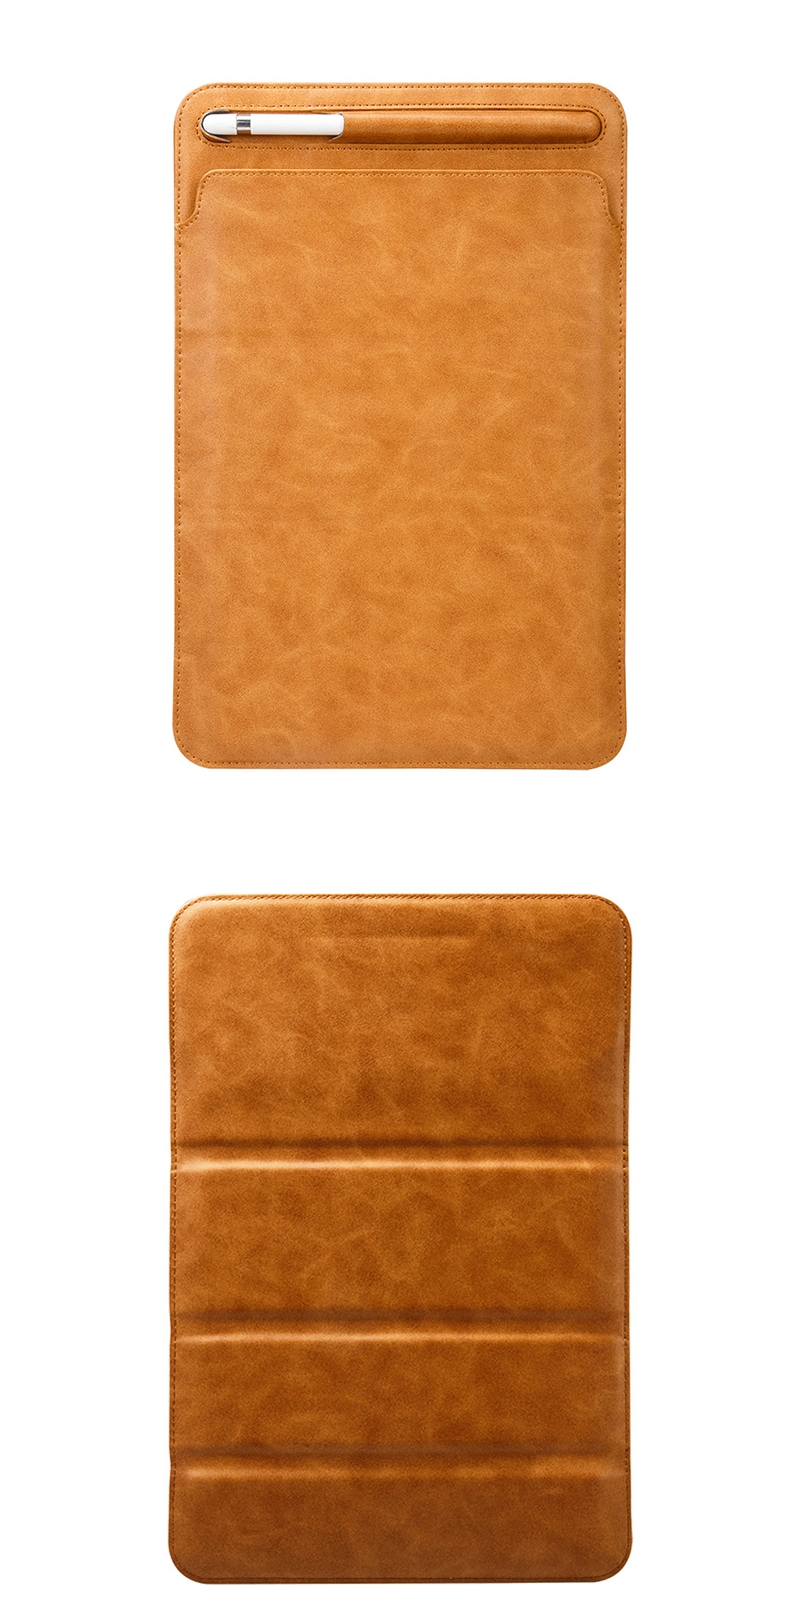 New Design Good Quality Genuine Leather iPad Case Sleeve Leather Tablet Case for iPad 9.7